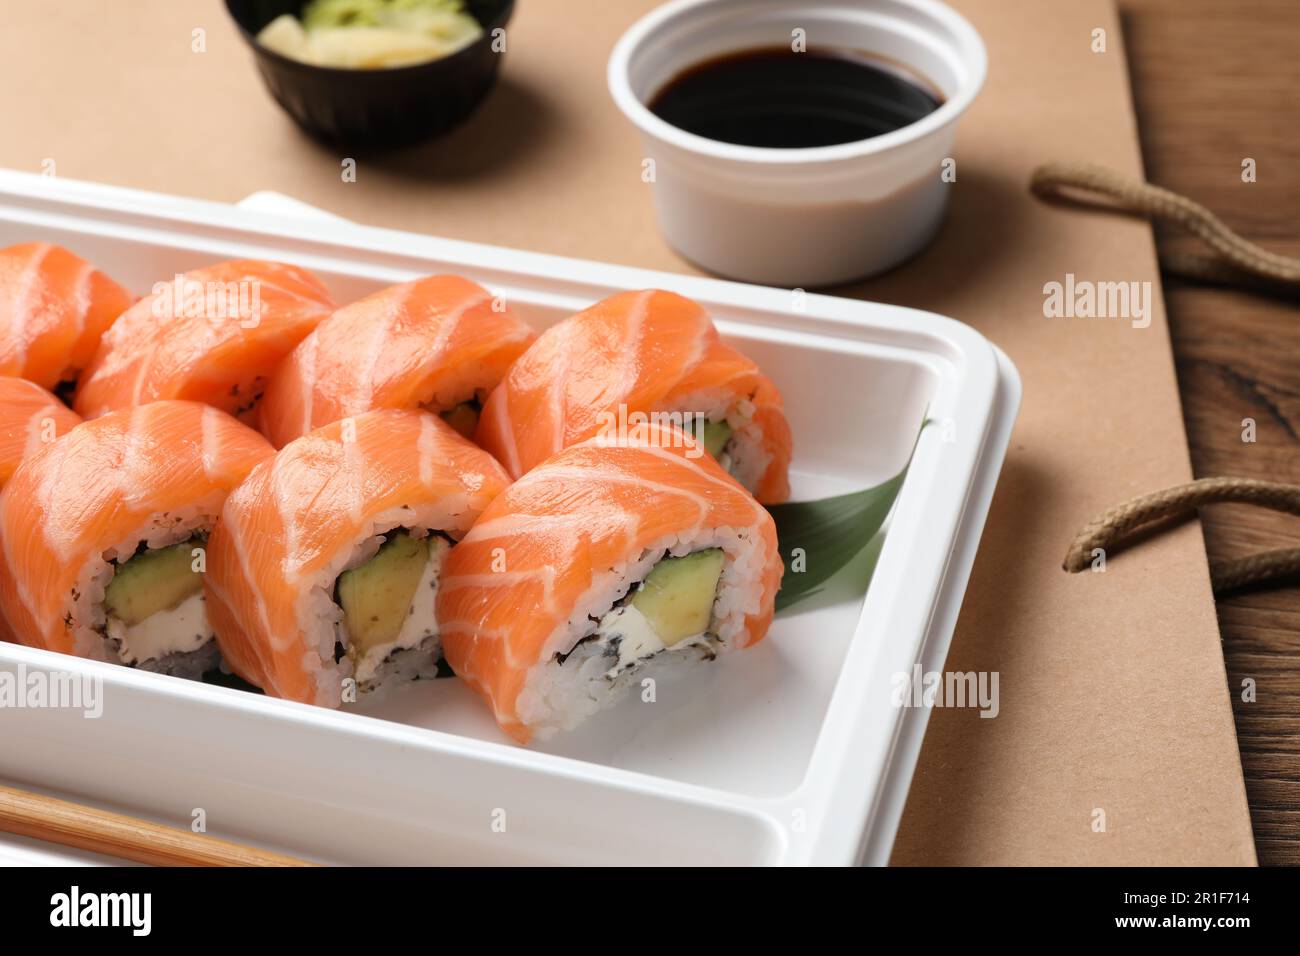 Plastic Food Container with Sushi from Restaurant on Isolated